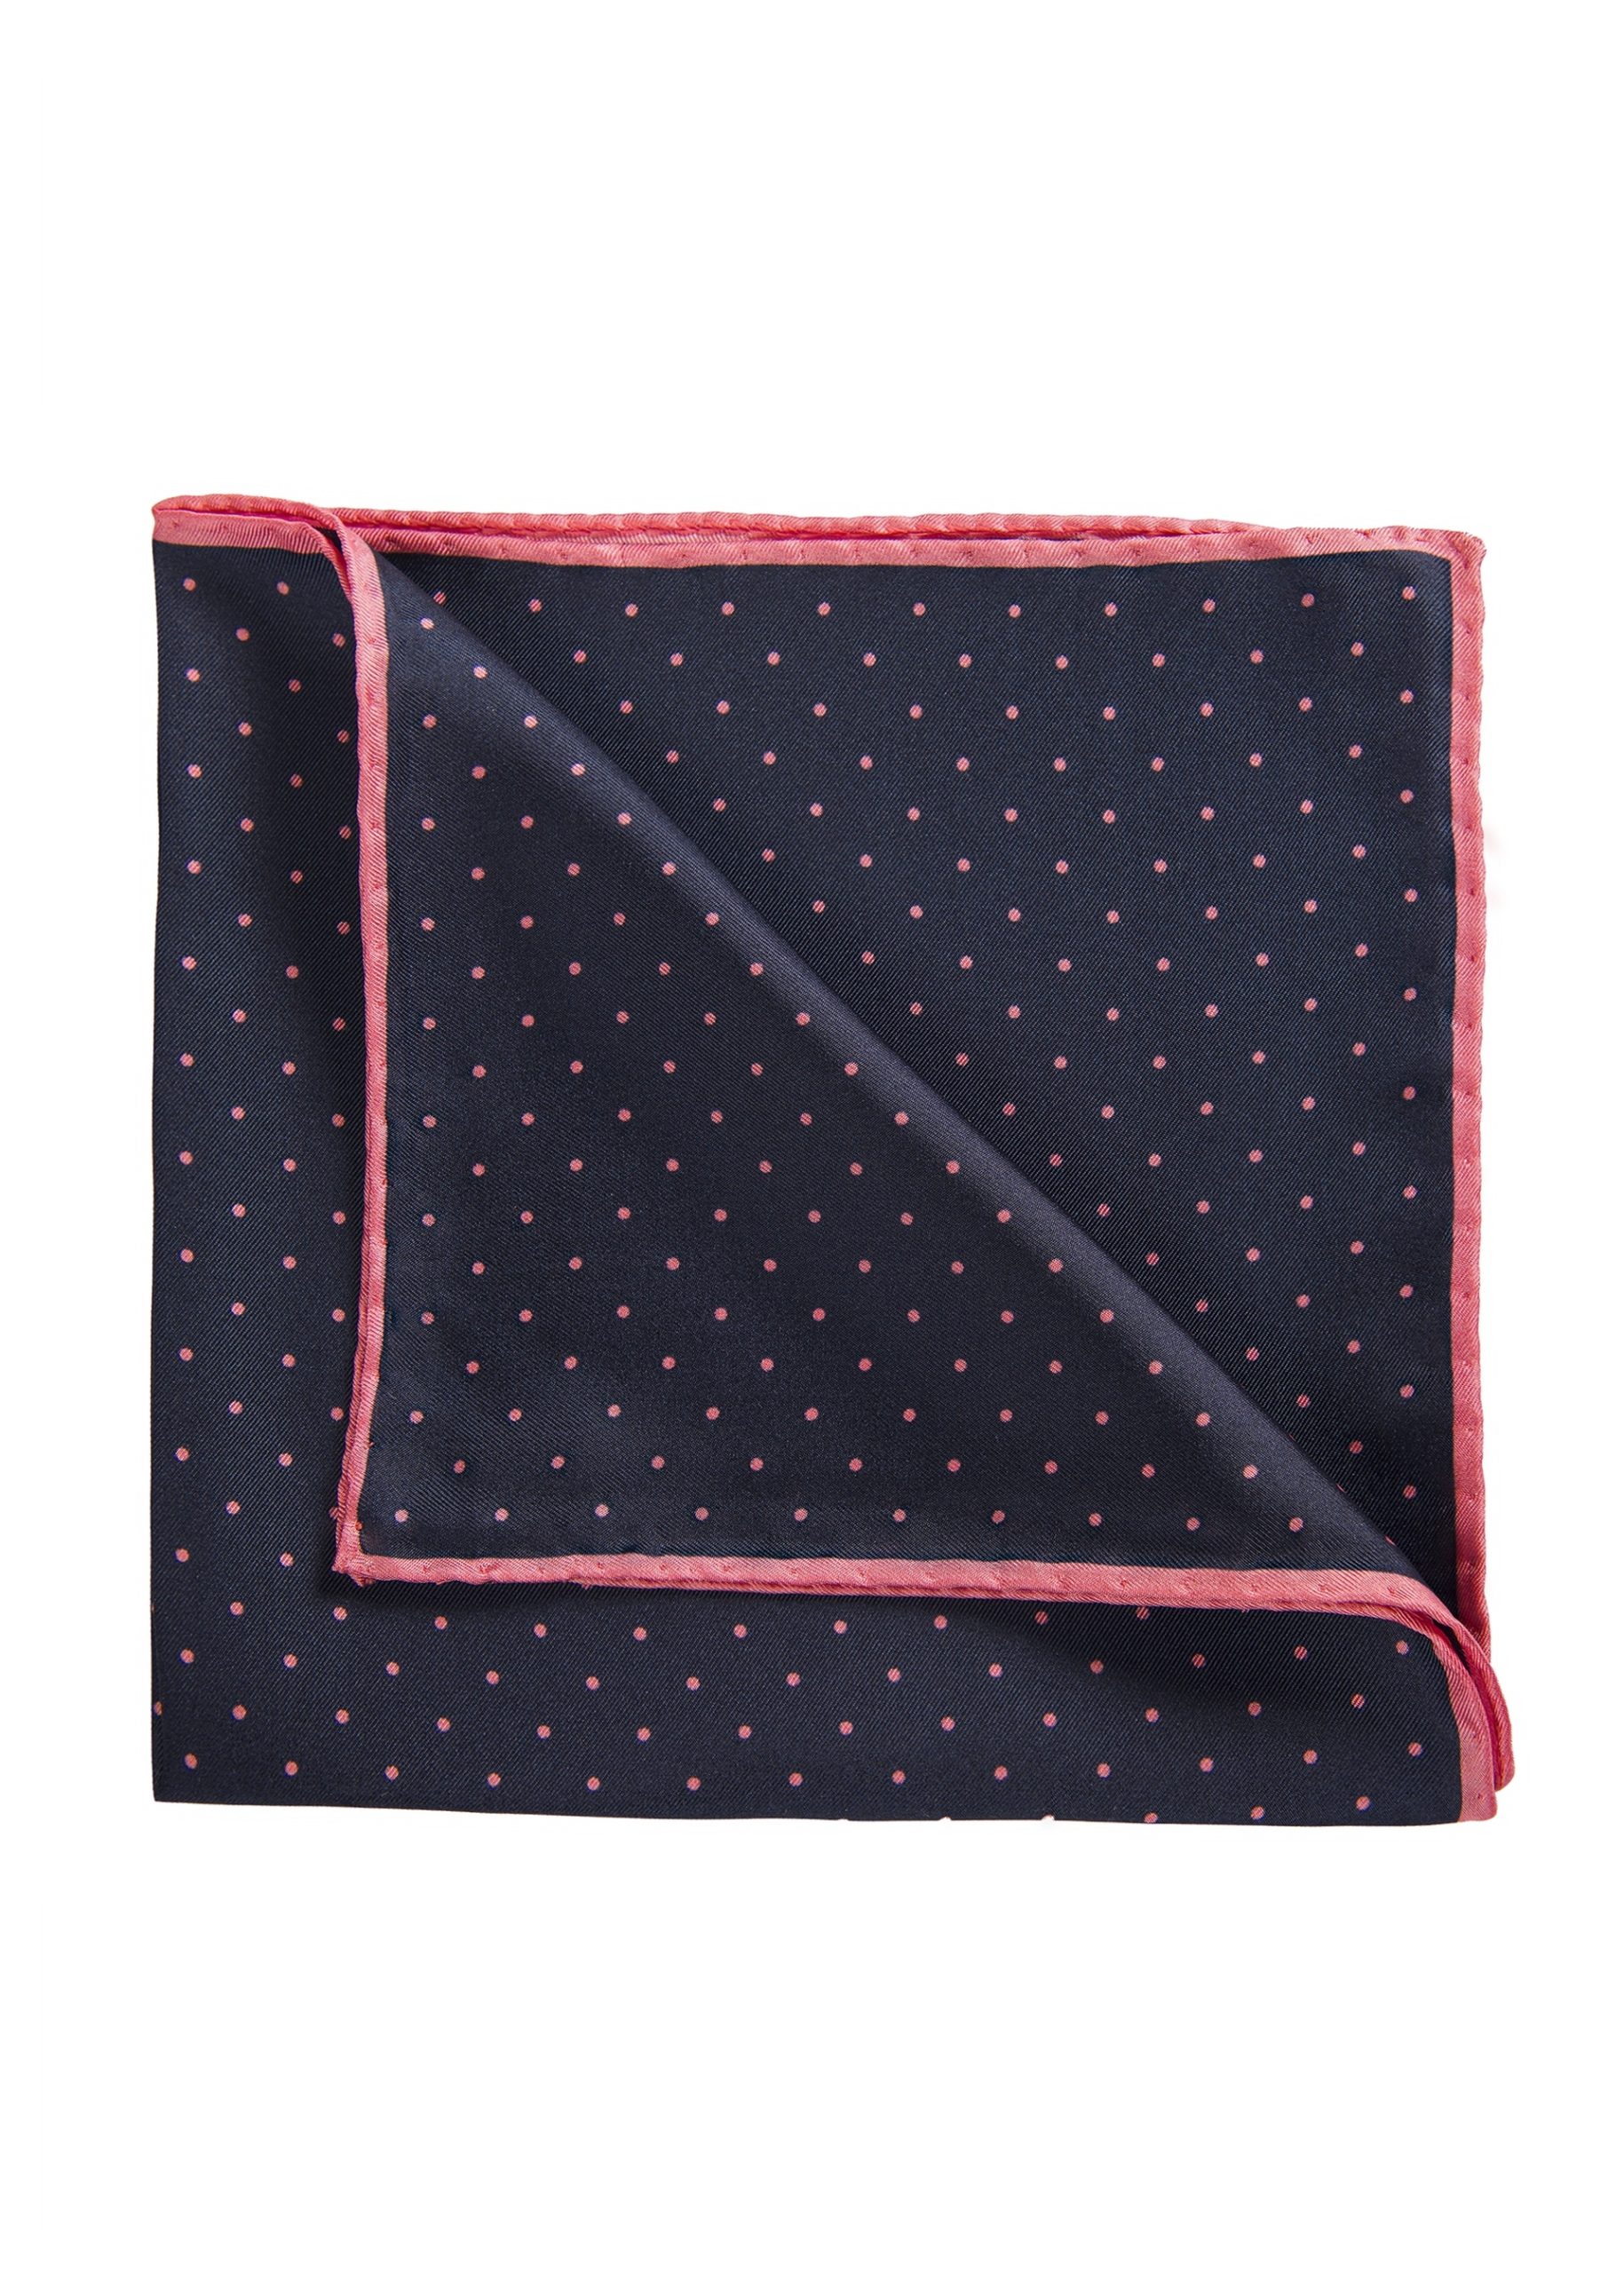 Roderick Charles navy and pink silk pocket square with hand rolled edges